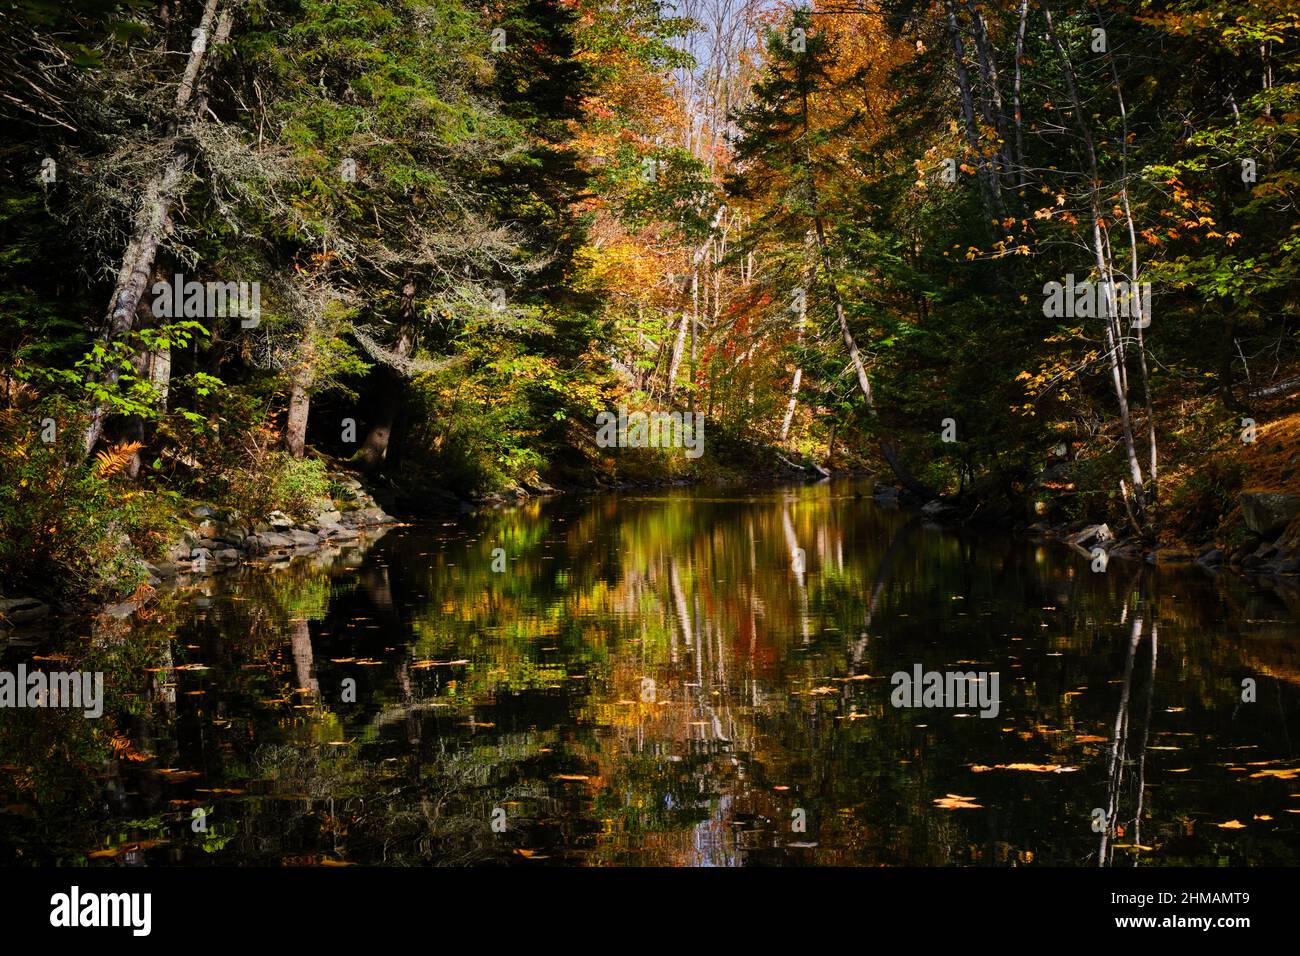 Autumn scene of a flat water river surrounded by colourful trees with reflection Stock Photo